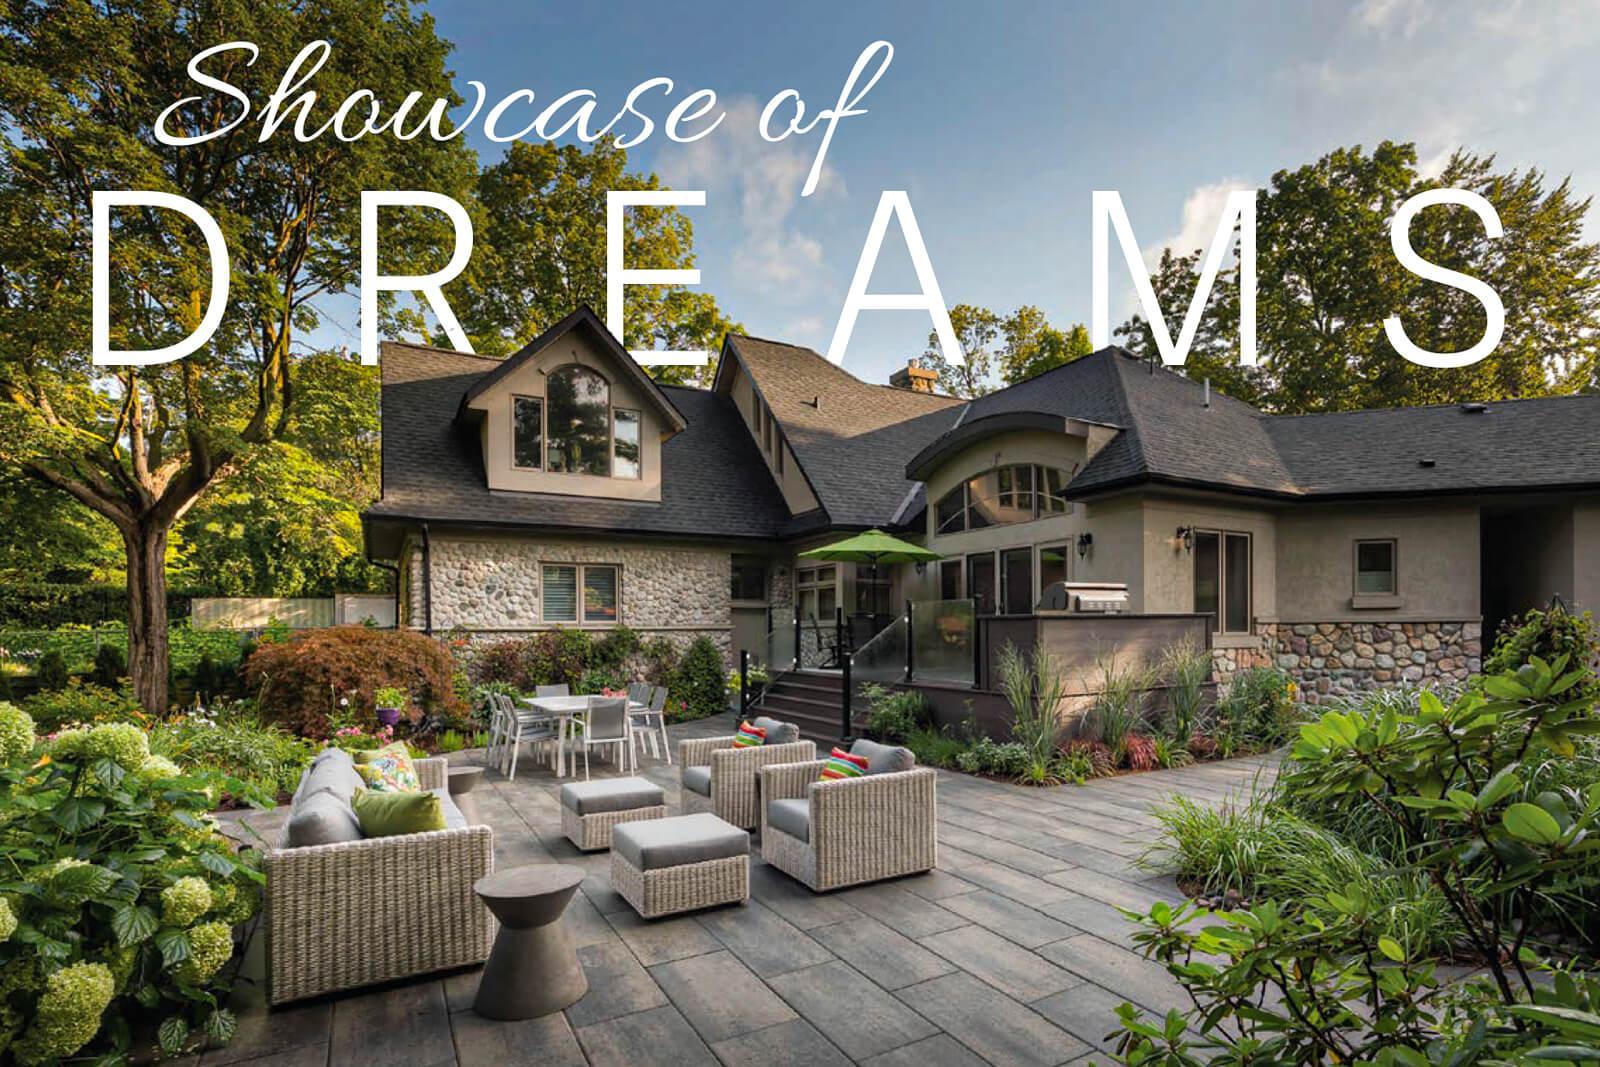 Showcase of dreams: Visualizing the future with M.E. Contracting